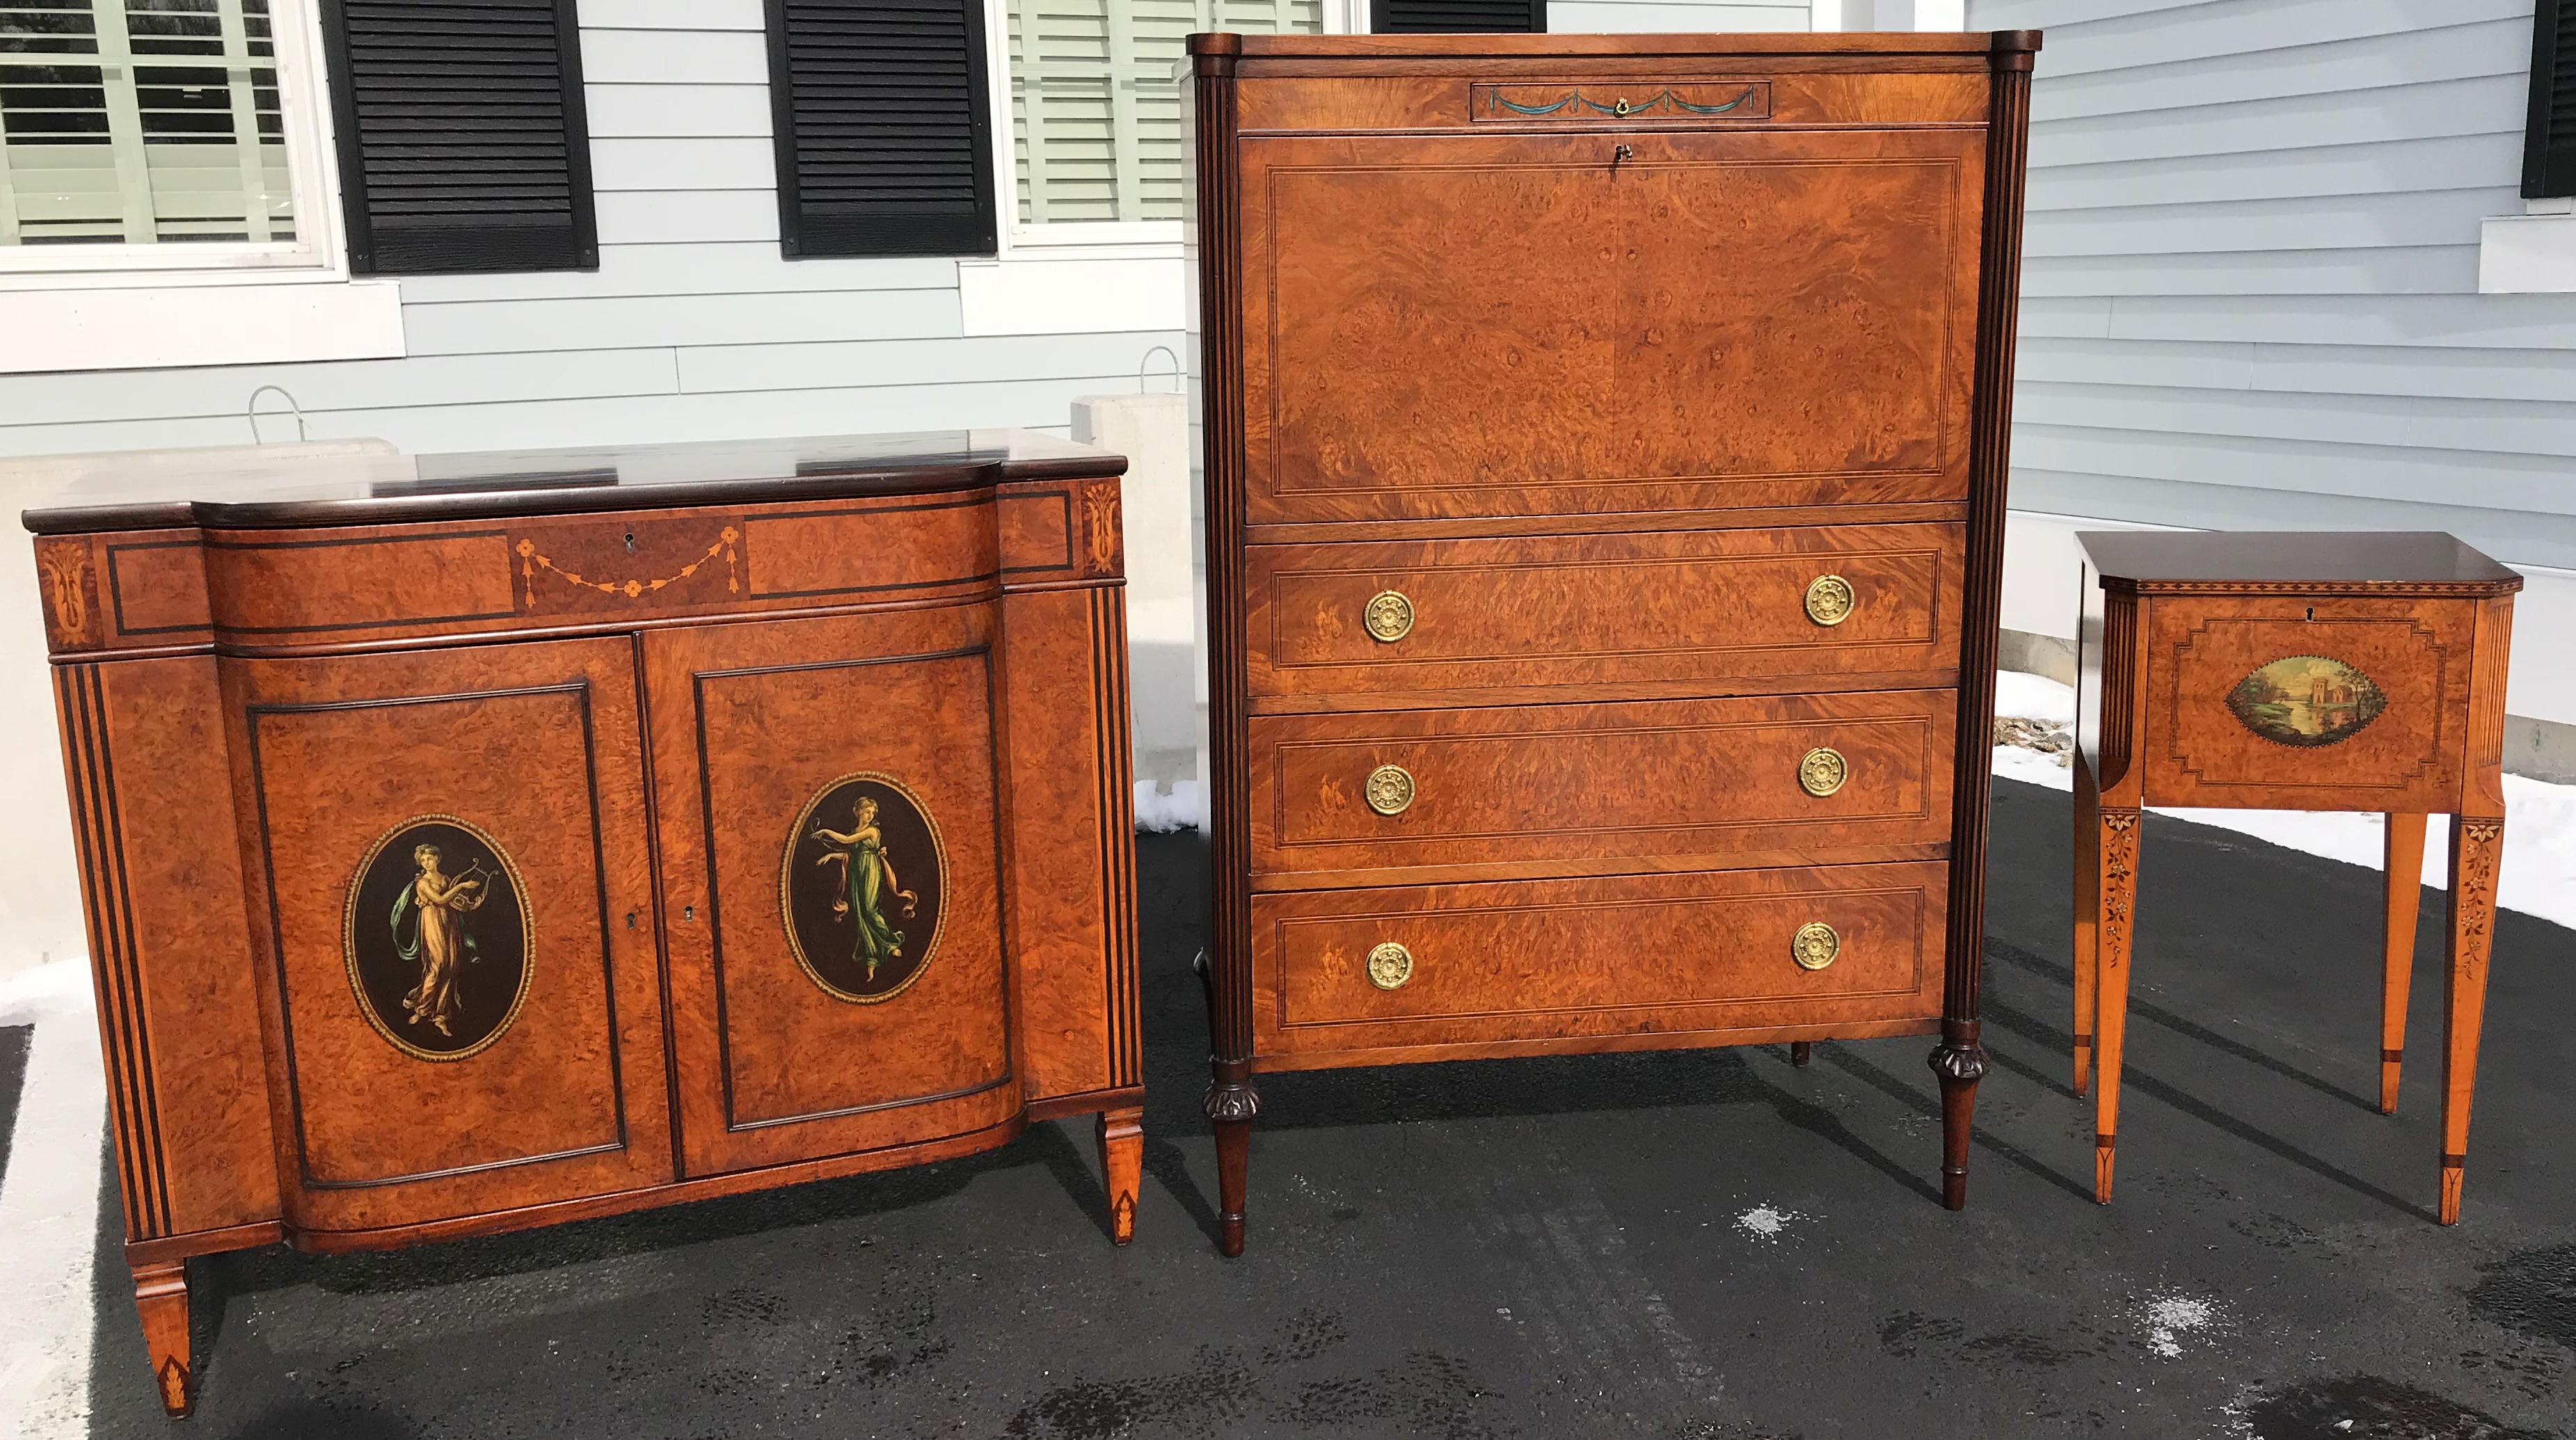 A beautiful five-piece custom mahogany and burled walnut veneered bedroom set including two twin beds, tall chest, low chest, nightstand, and hand painted mirror. The pieces feature a variety of swag, banded, and diamond inlay, carved scroll